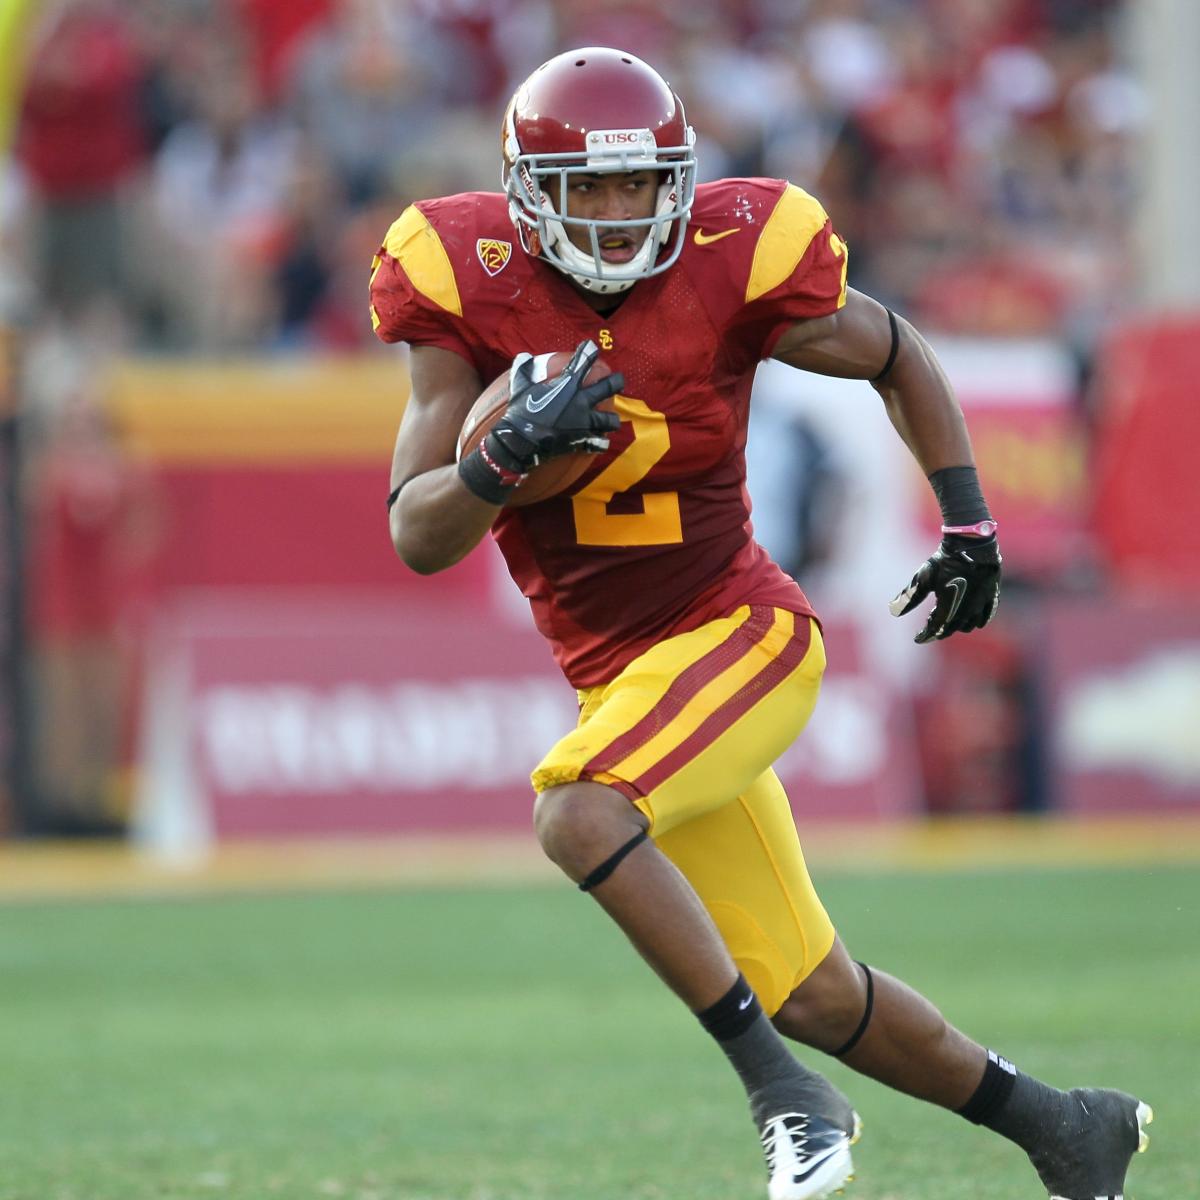 USC Football: Will Marqise Lee Outshine Robert Woods in 2012? | News ...